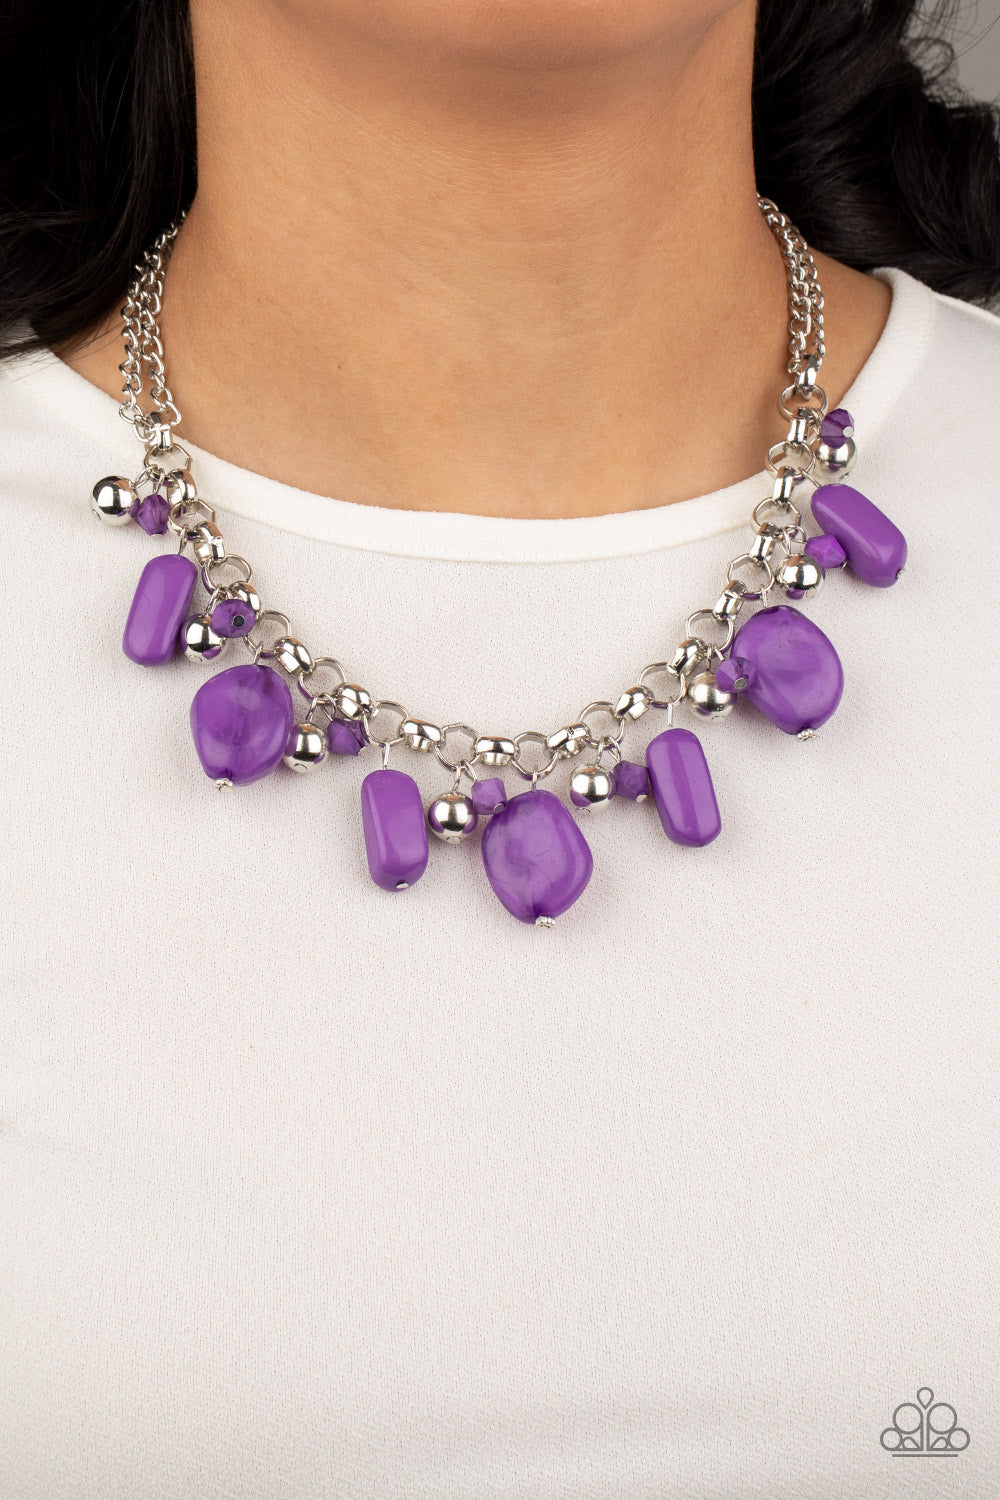 Grand Canyon Grotto - Purple - $5 Jewelry with Ashley Swint